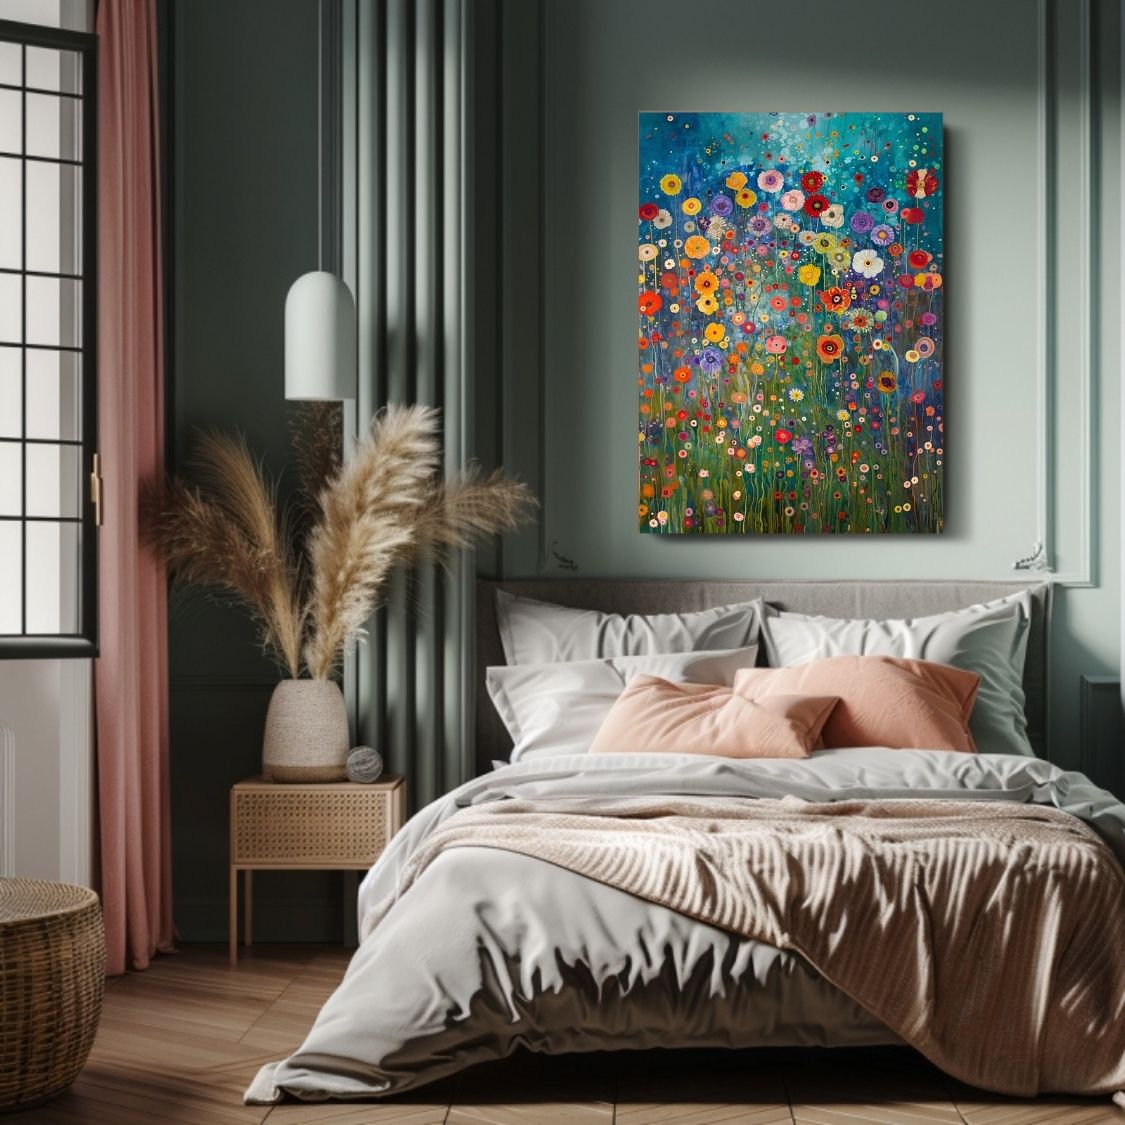 Canvas print wall art showing 'Natures Song - Wildflowers with a Soft Abstract Touch' in a bedroom